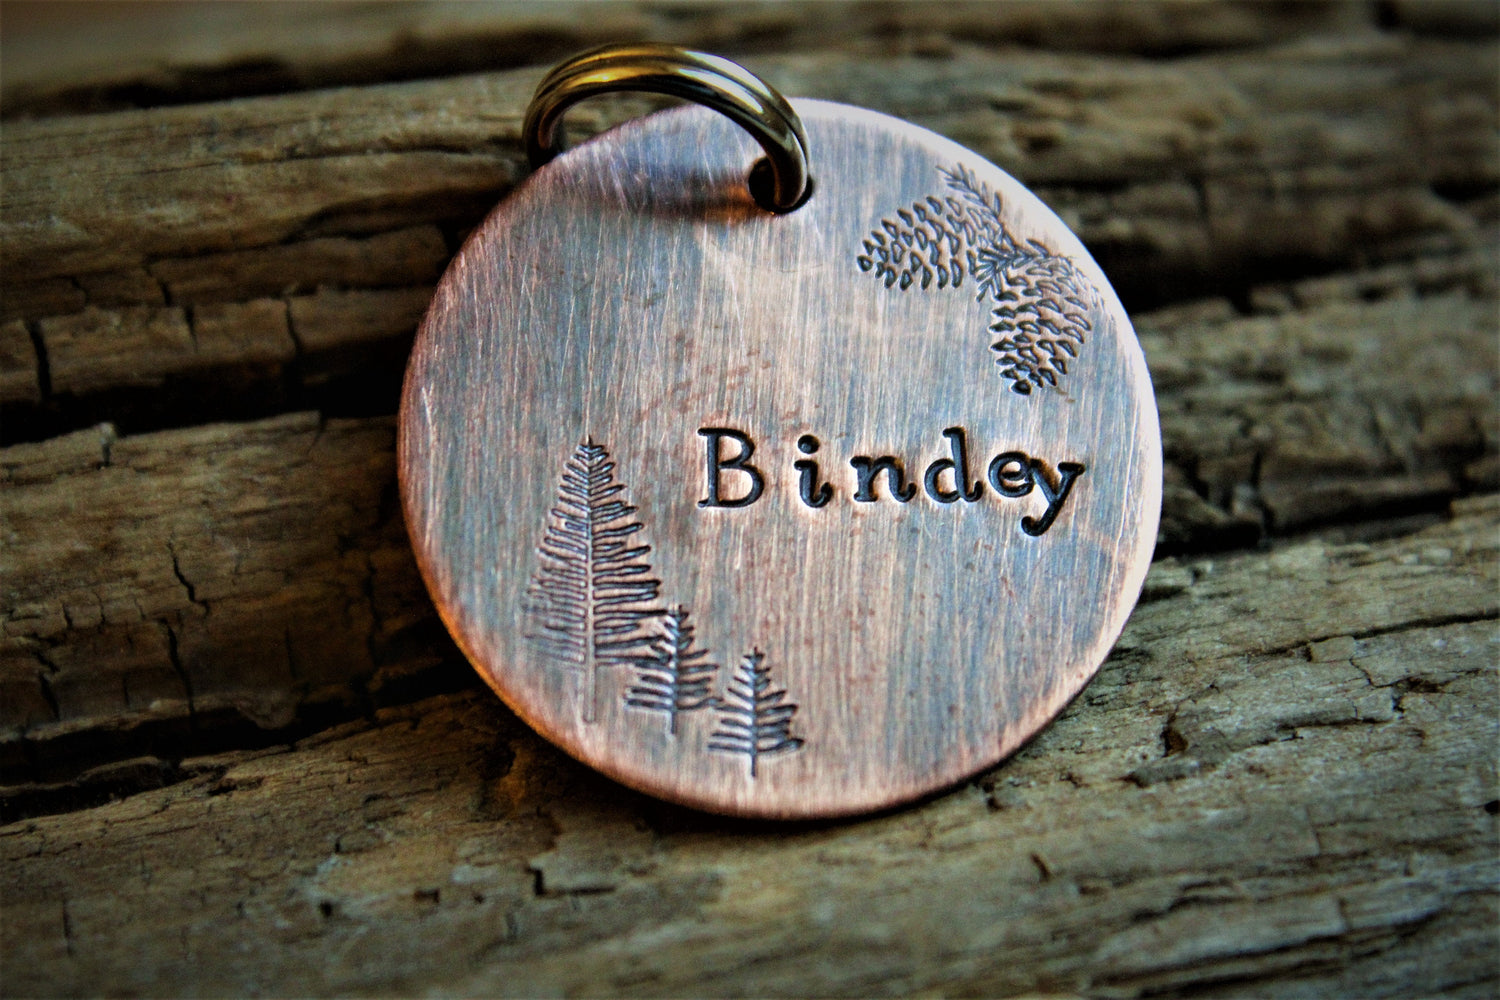 Custom ID Dog Tag, The Bindey, Hand Stamped Dog Tag, Tag for Dog, Tag with Trees, Rustic Tag, Copper Dog Tag, Pet ID, Pine Cones